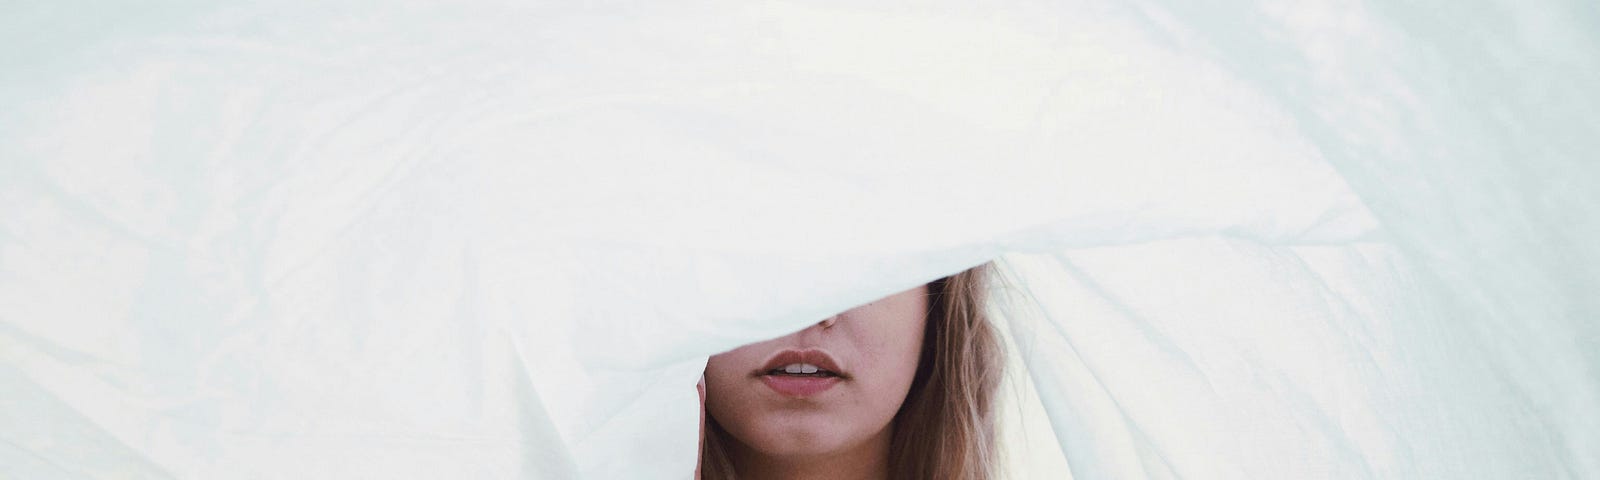 Teenage girl in white partially hiding her face behind a billowing white sheet